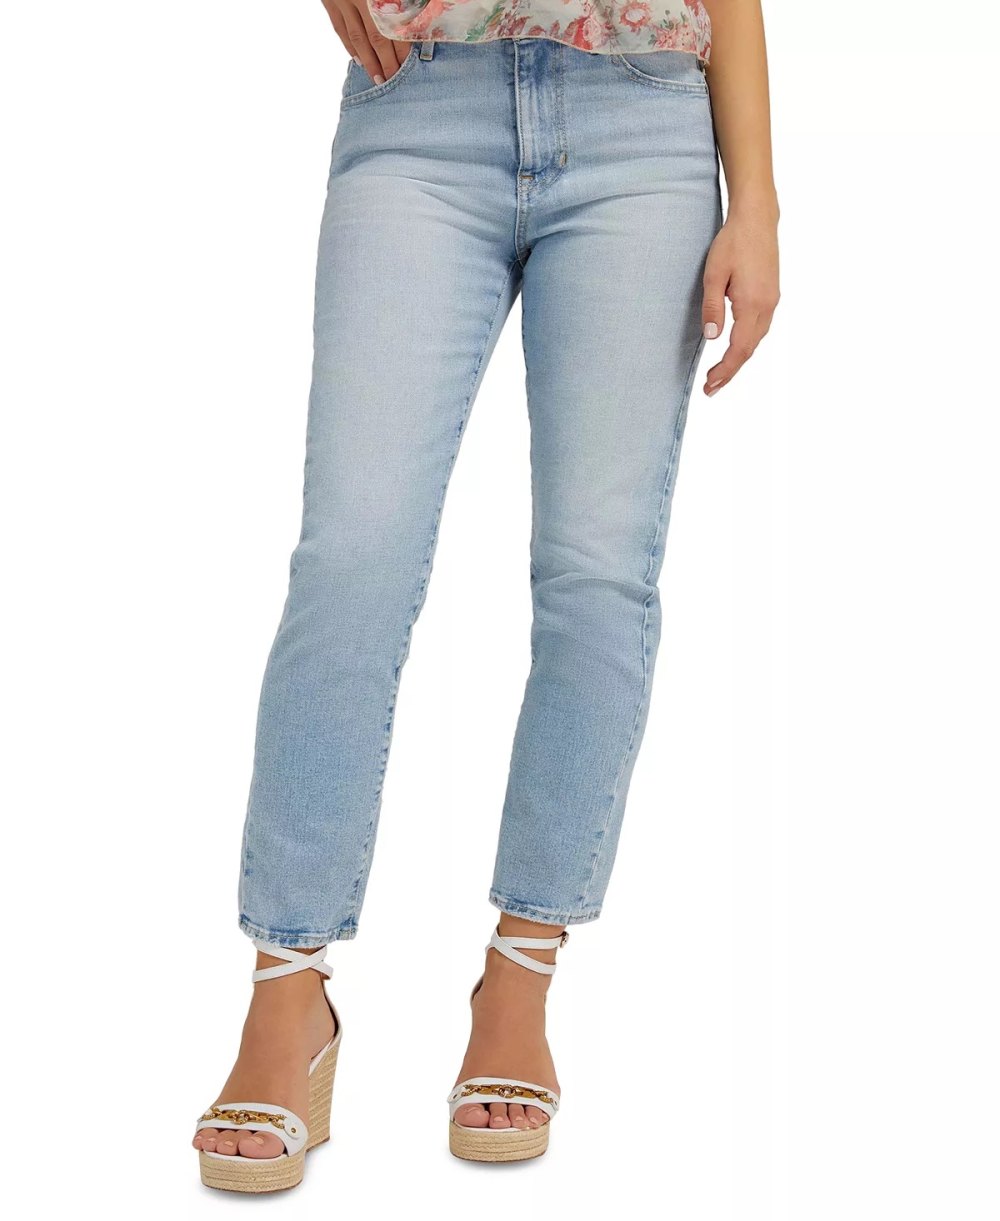 Guess Classic High-Waist Jeans Are Over 50% Off at Macy’s | Us Weekly